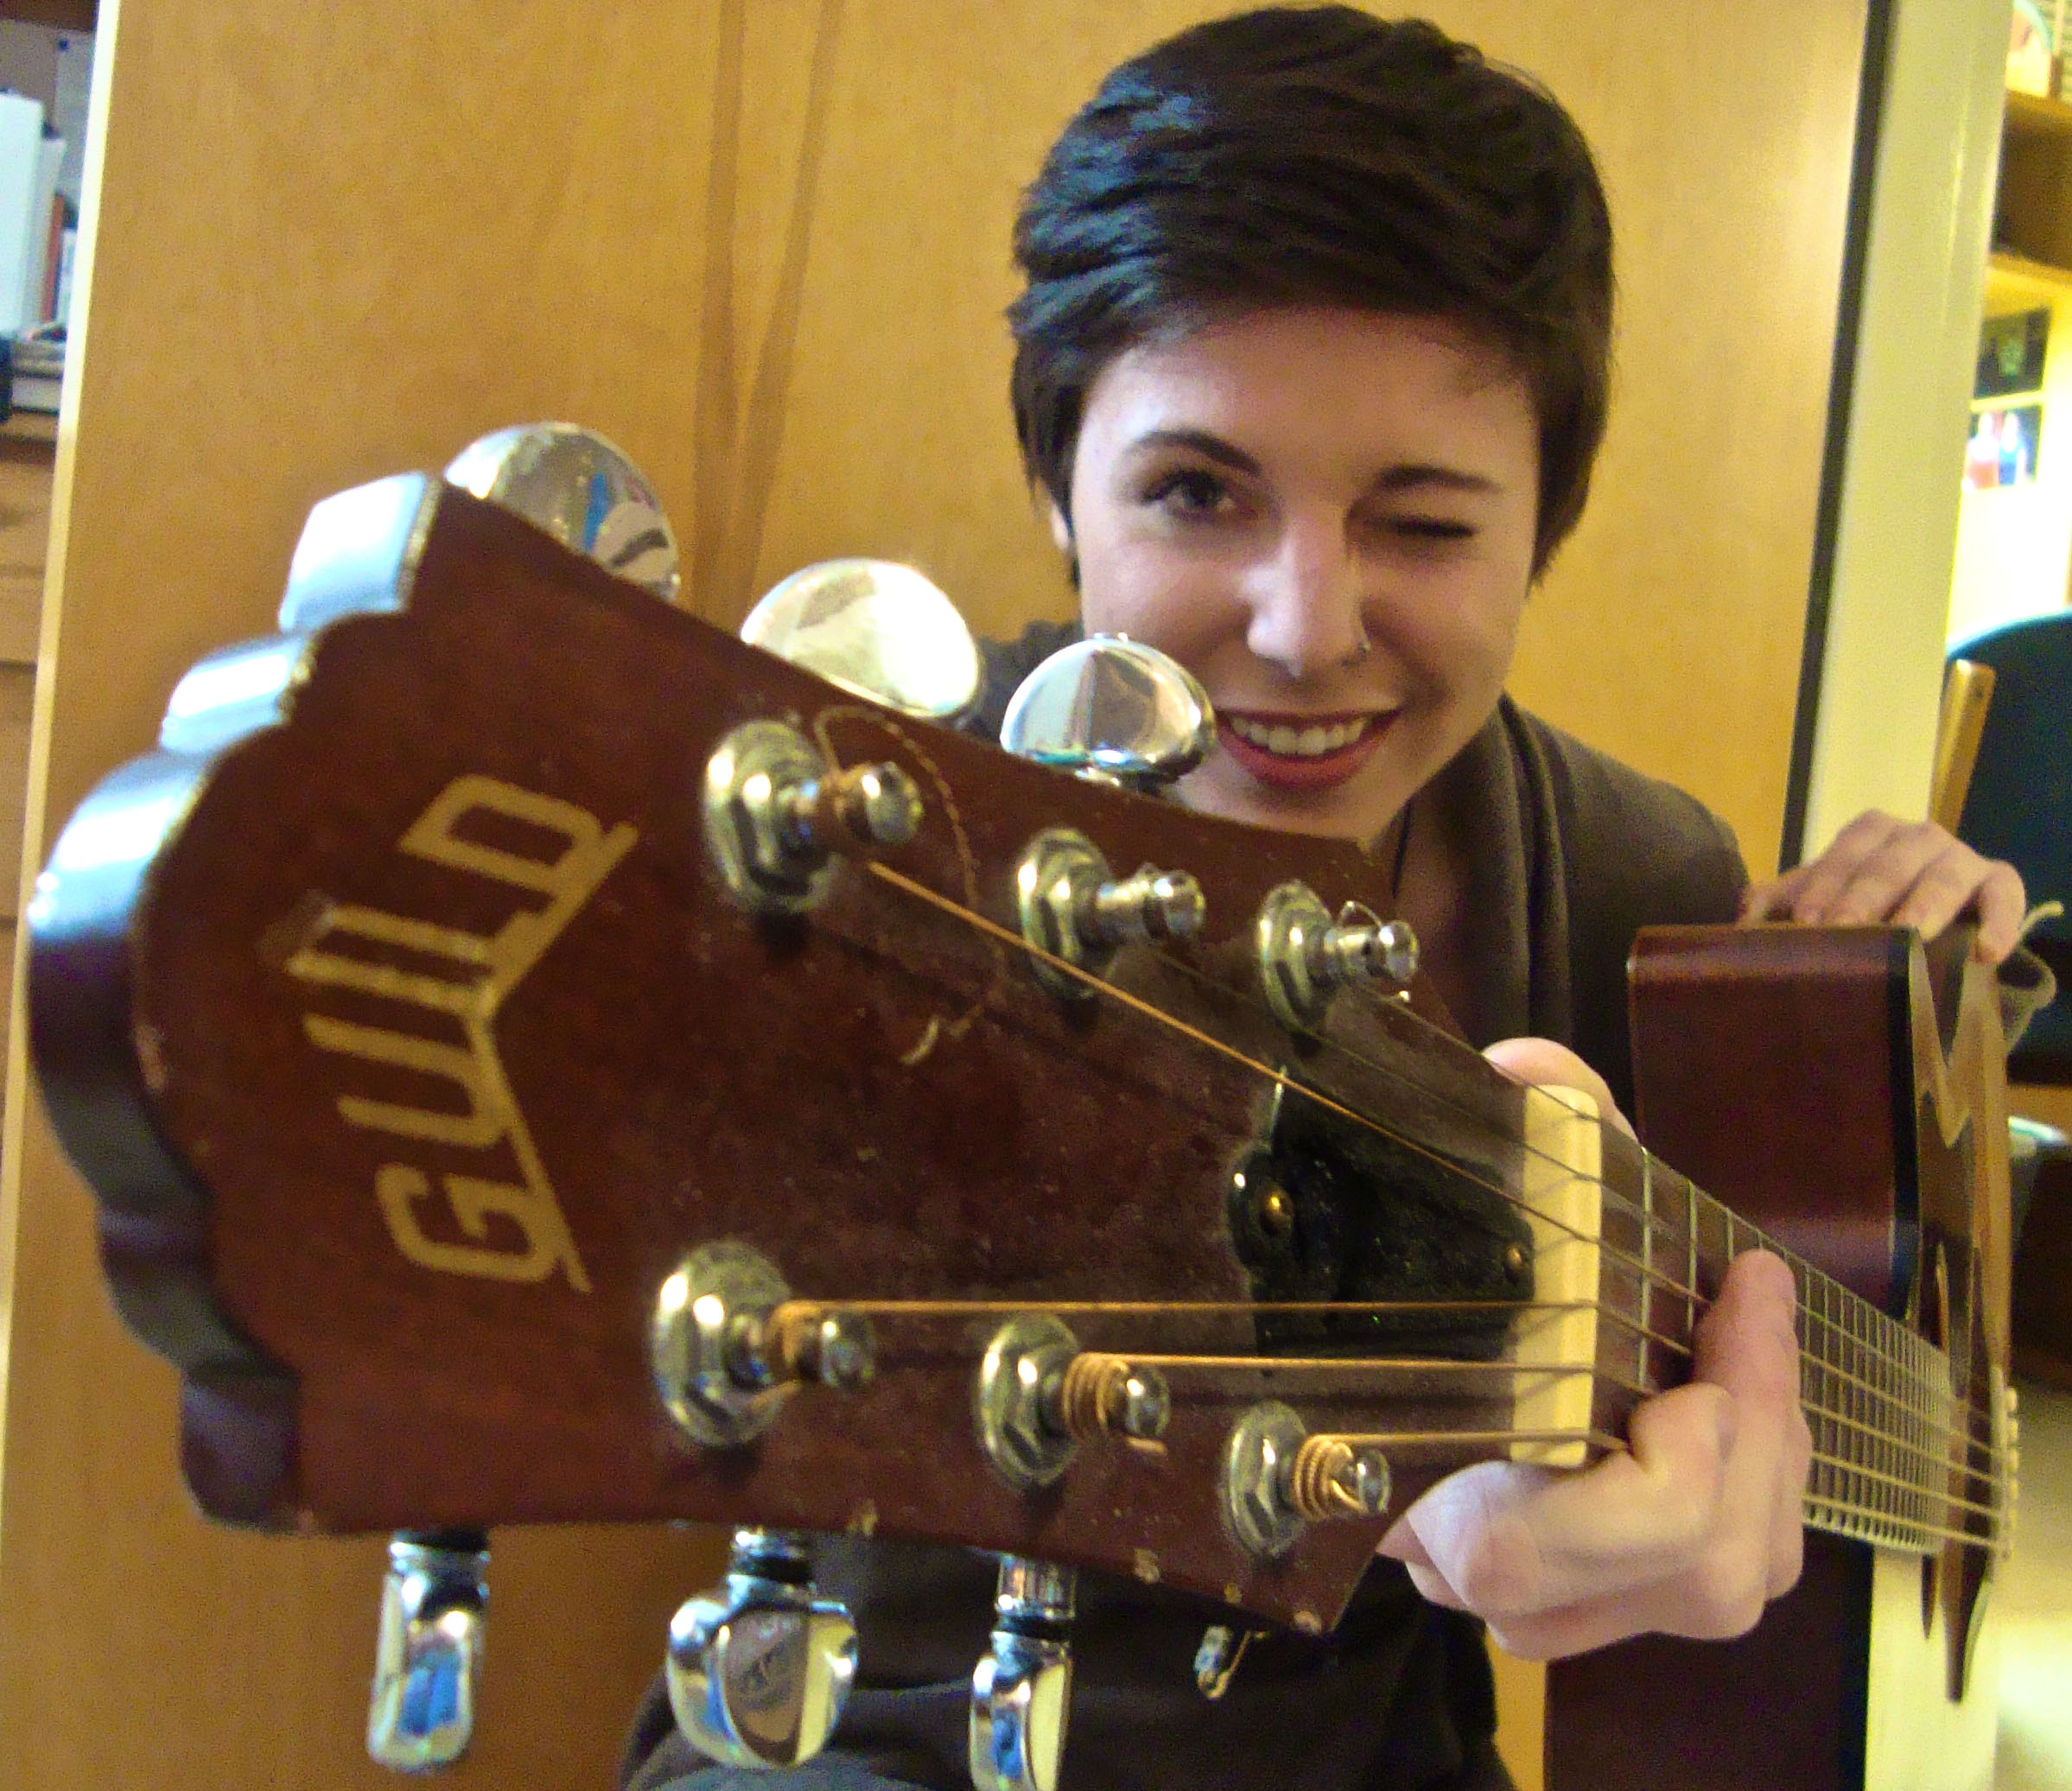 Lauren Treiber poses for a picture with her guitar